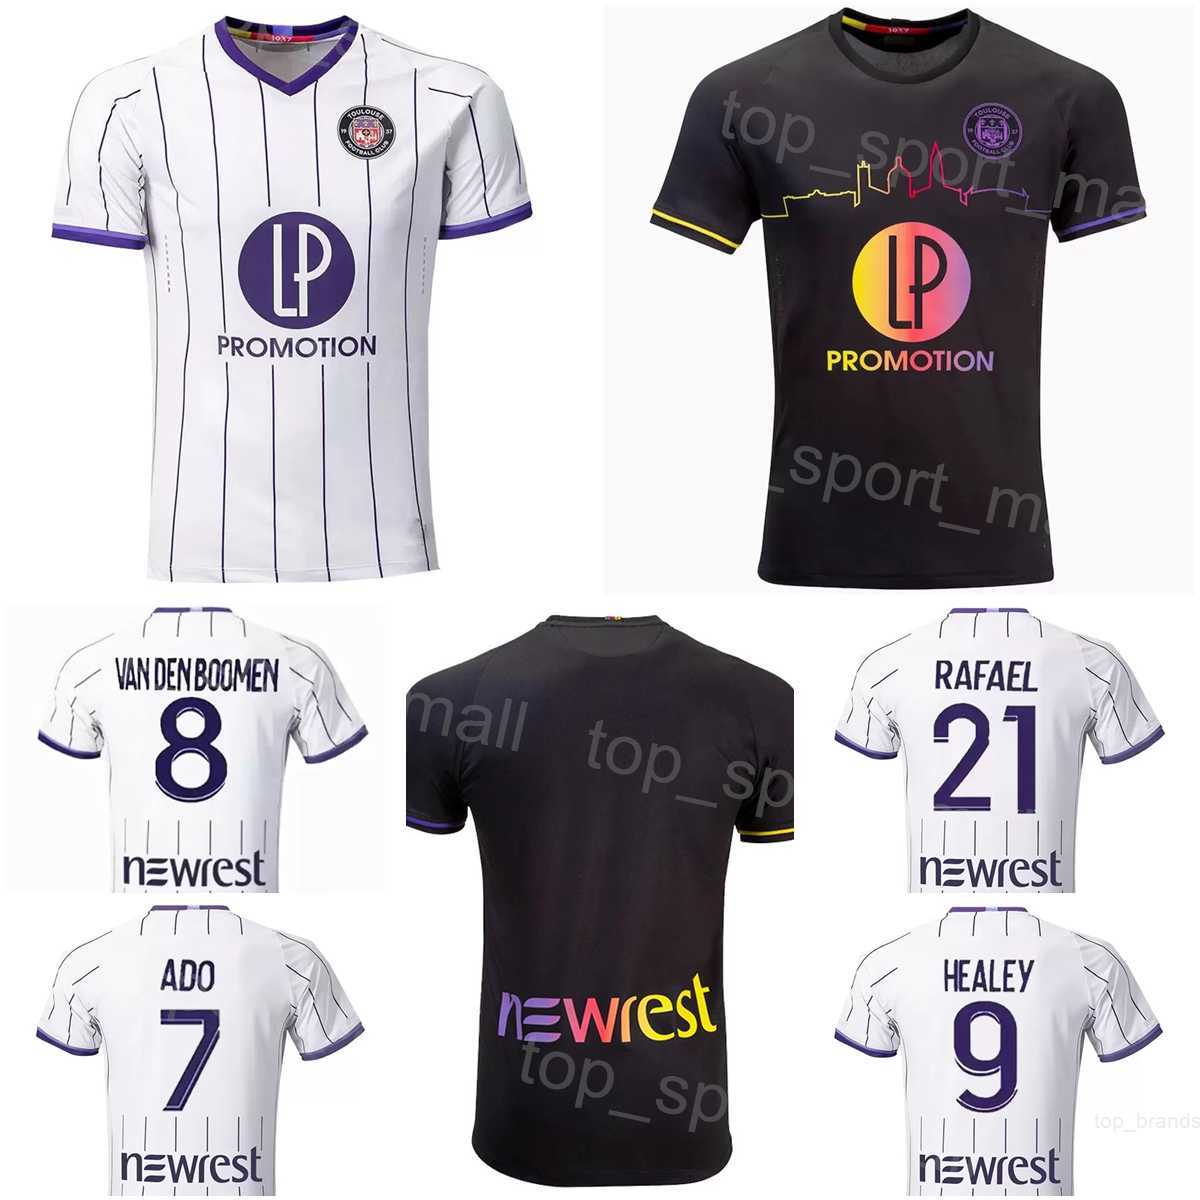 

22-23 Club Toulouse Soccer Jersey 27 DALLINGA 21 RATAO 9 HEALEY 4 ROUAULT 2 NICOLAISEN 17 SPIERINGS 8 BOOMEN 30 DUPE 3 DESLER 3 ABOUKHLAL Football Shirt Kits Black White, With patch